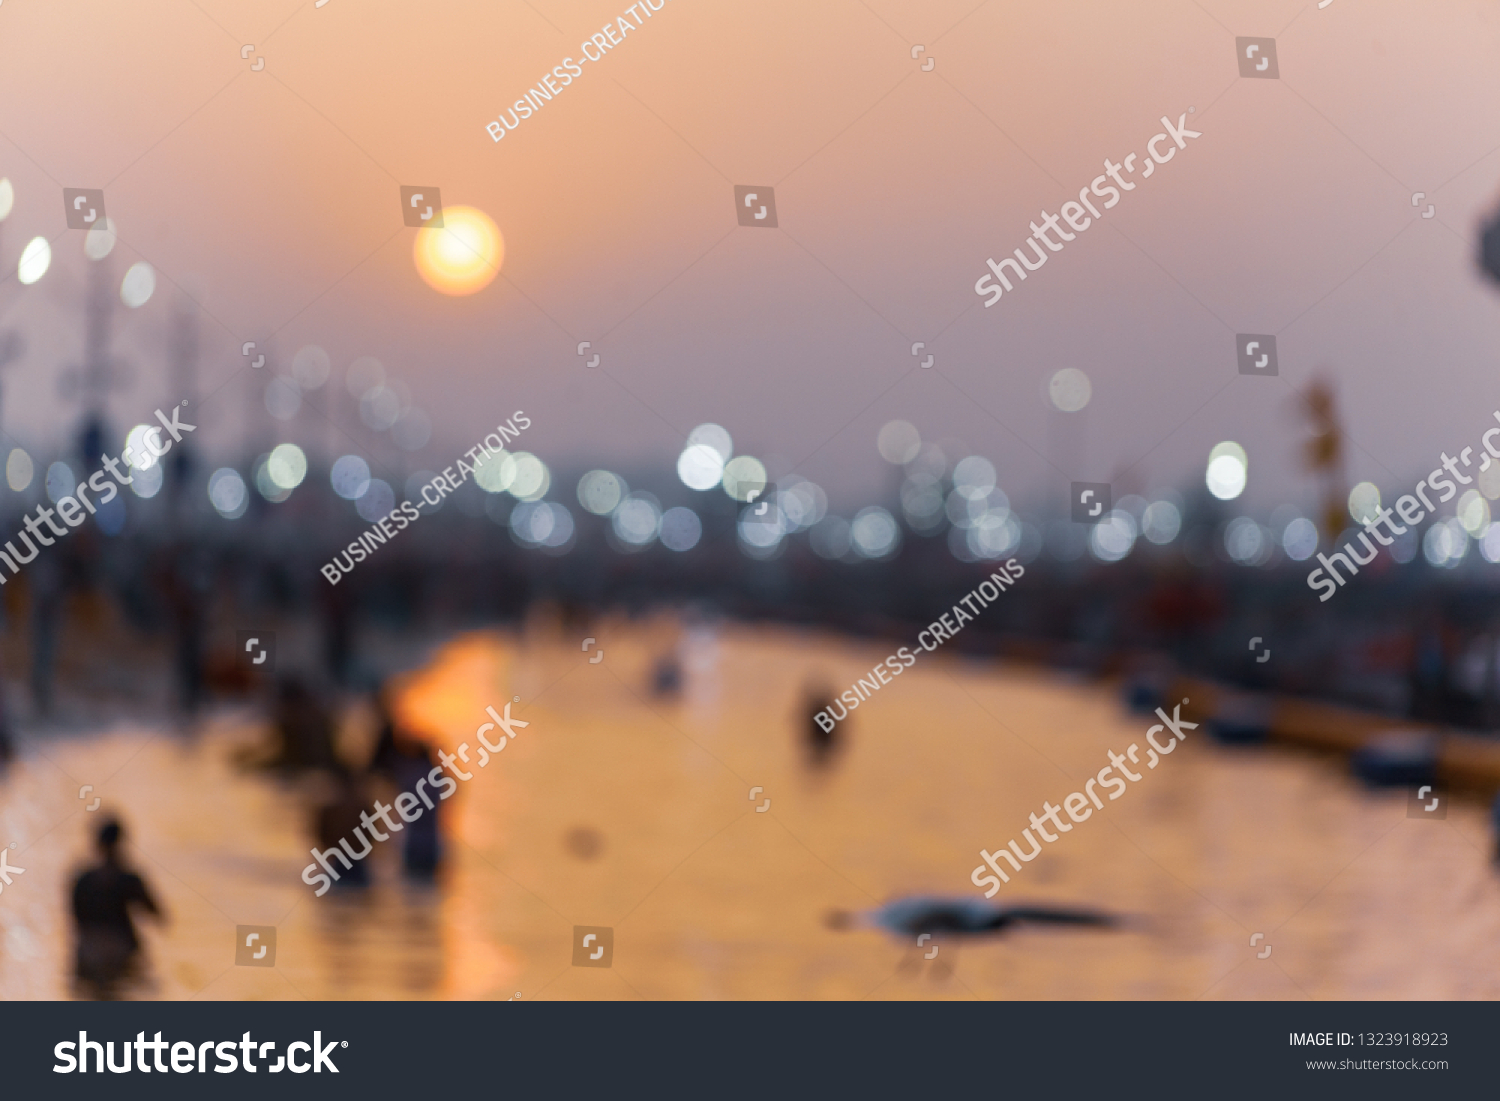 Defocoused scene of beautiful sunrise with reflection on river water at Allahabad (India) Kumbh 2019. #1323918923